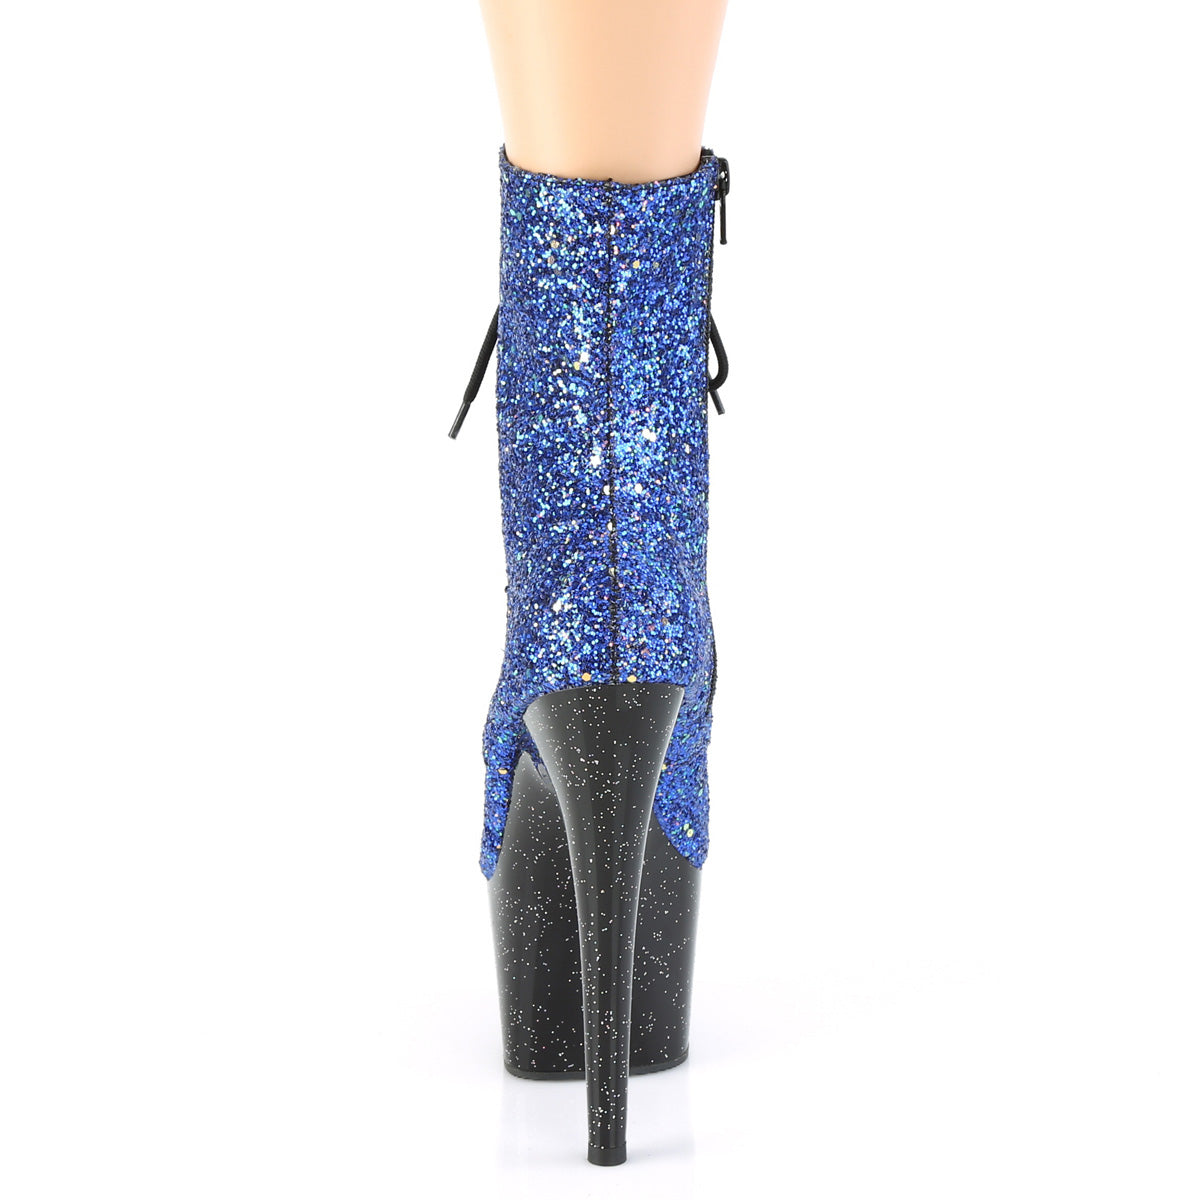 ADORE-1020MG 7 Inch Blue Glitter Black Pole Dance Ankle Boot-Pleaser- Sexy Shoes Fetish Footwear